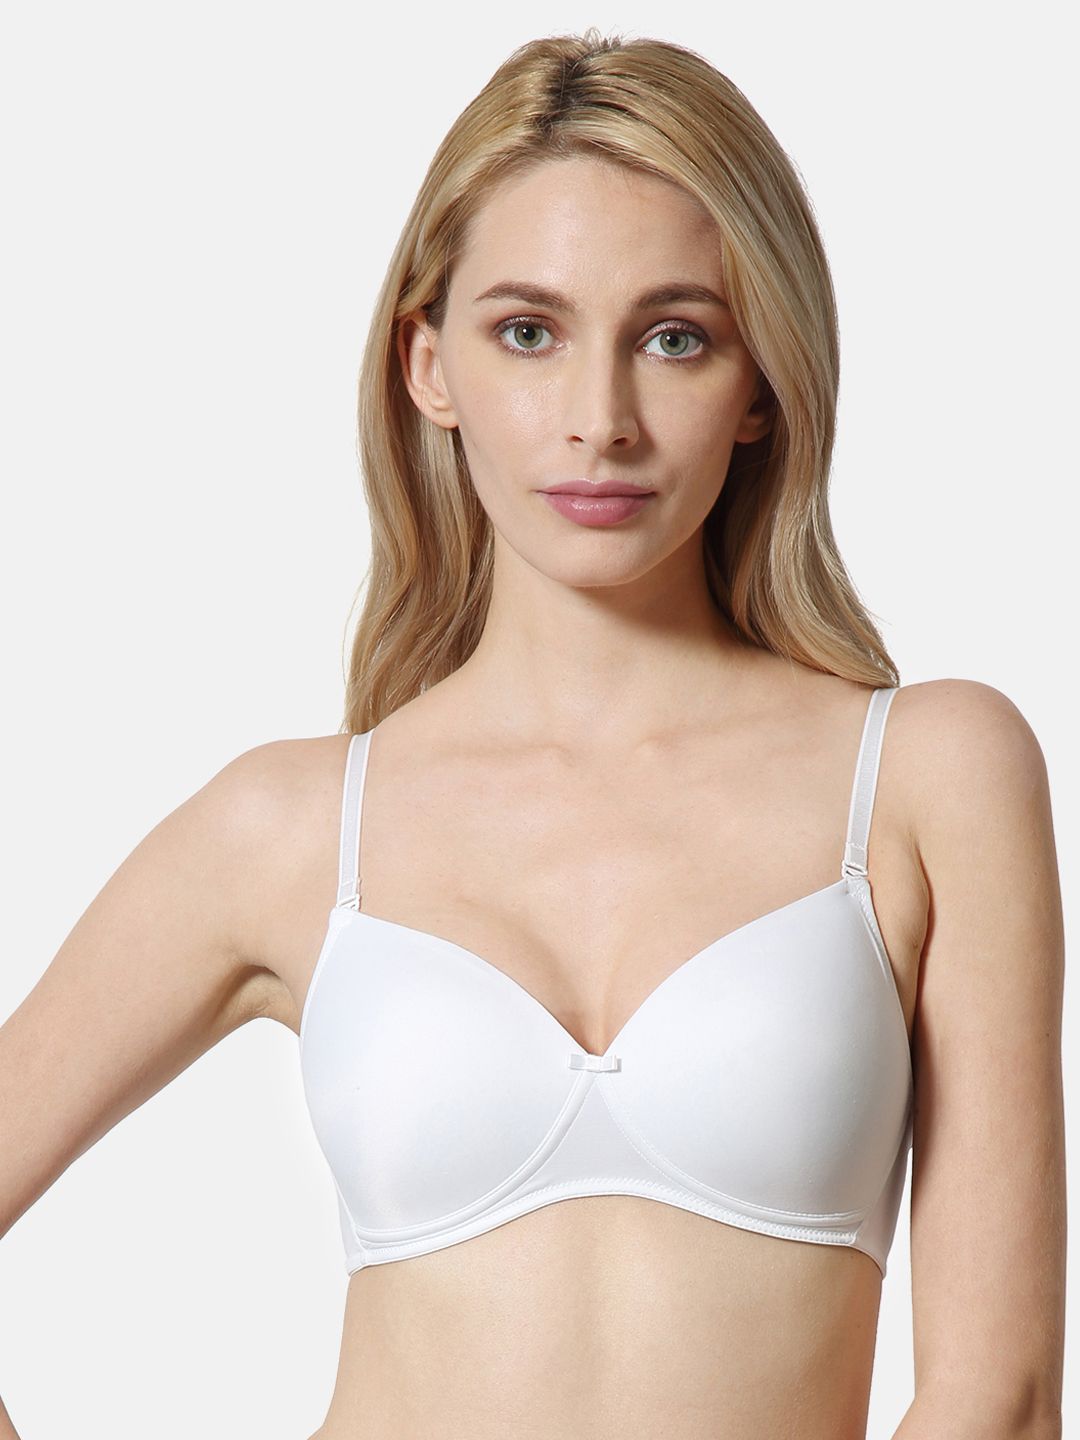 Van Heusen White Solid Non-Wired Lightly Padded T-shirt Bra ILIBRALXSWH22001 Price in India